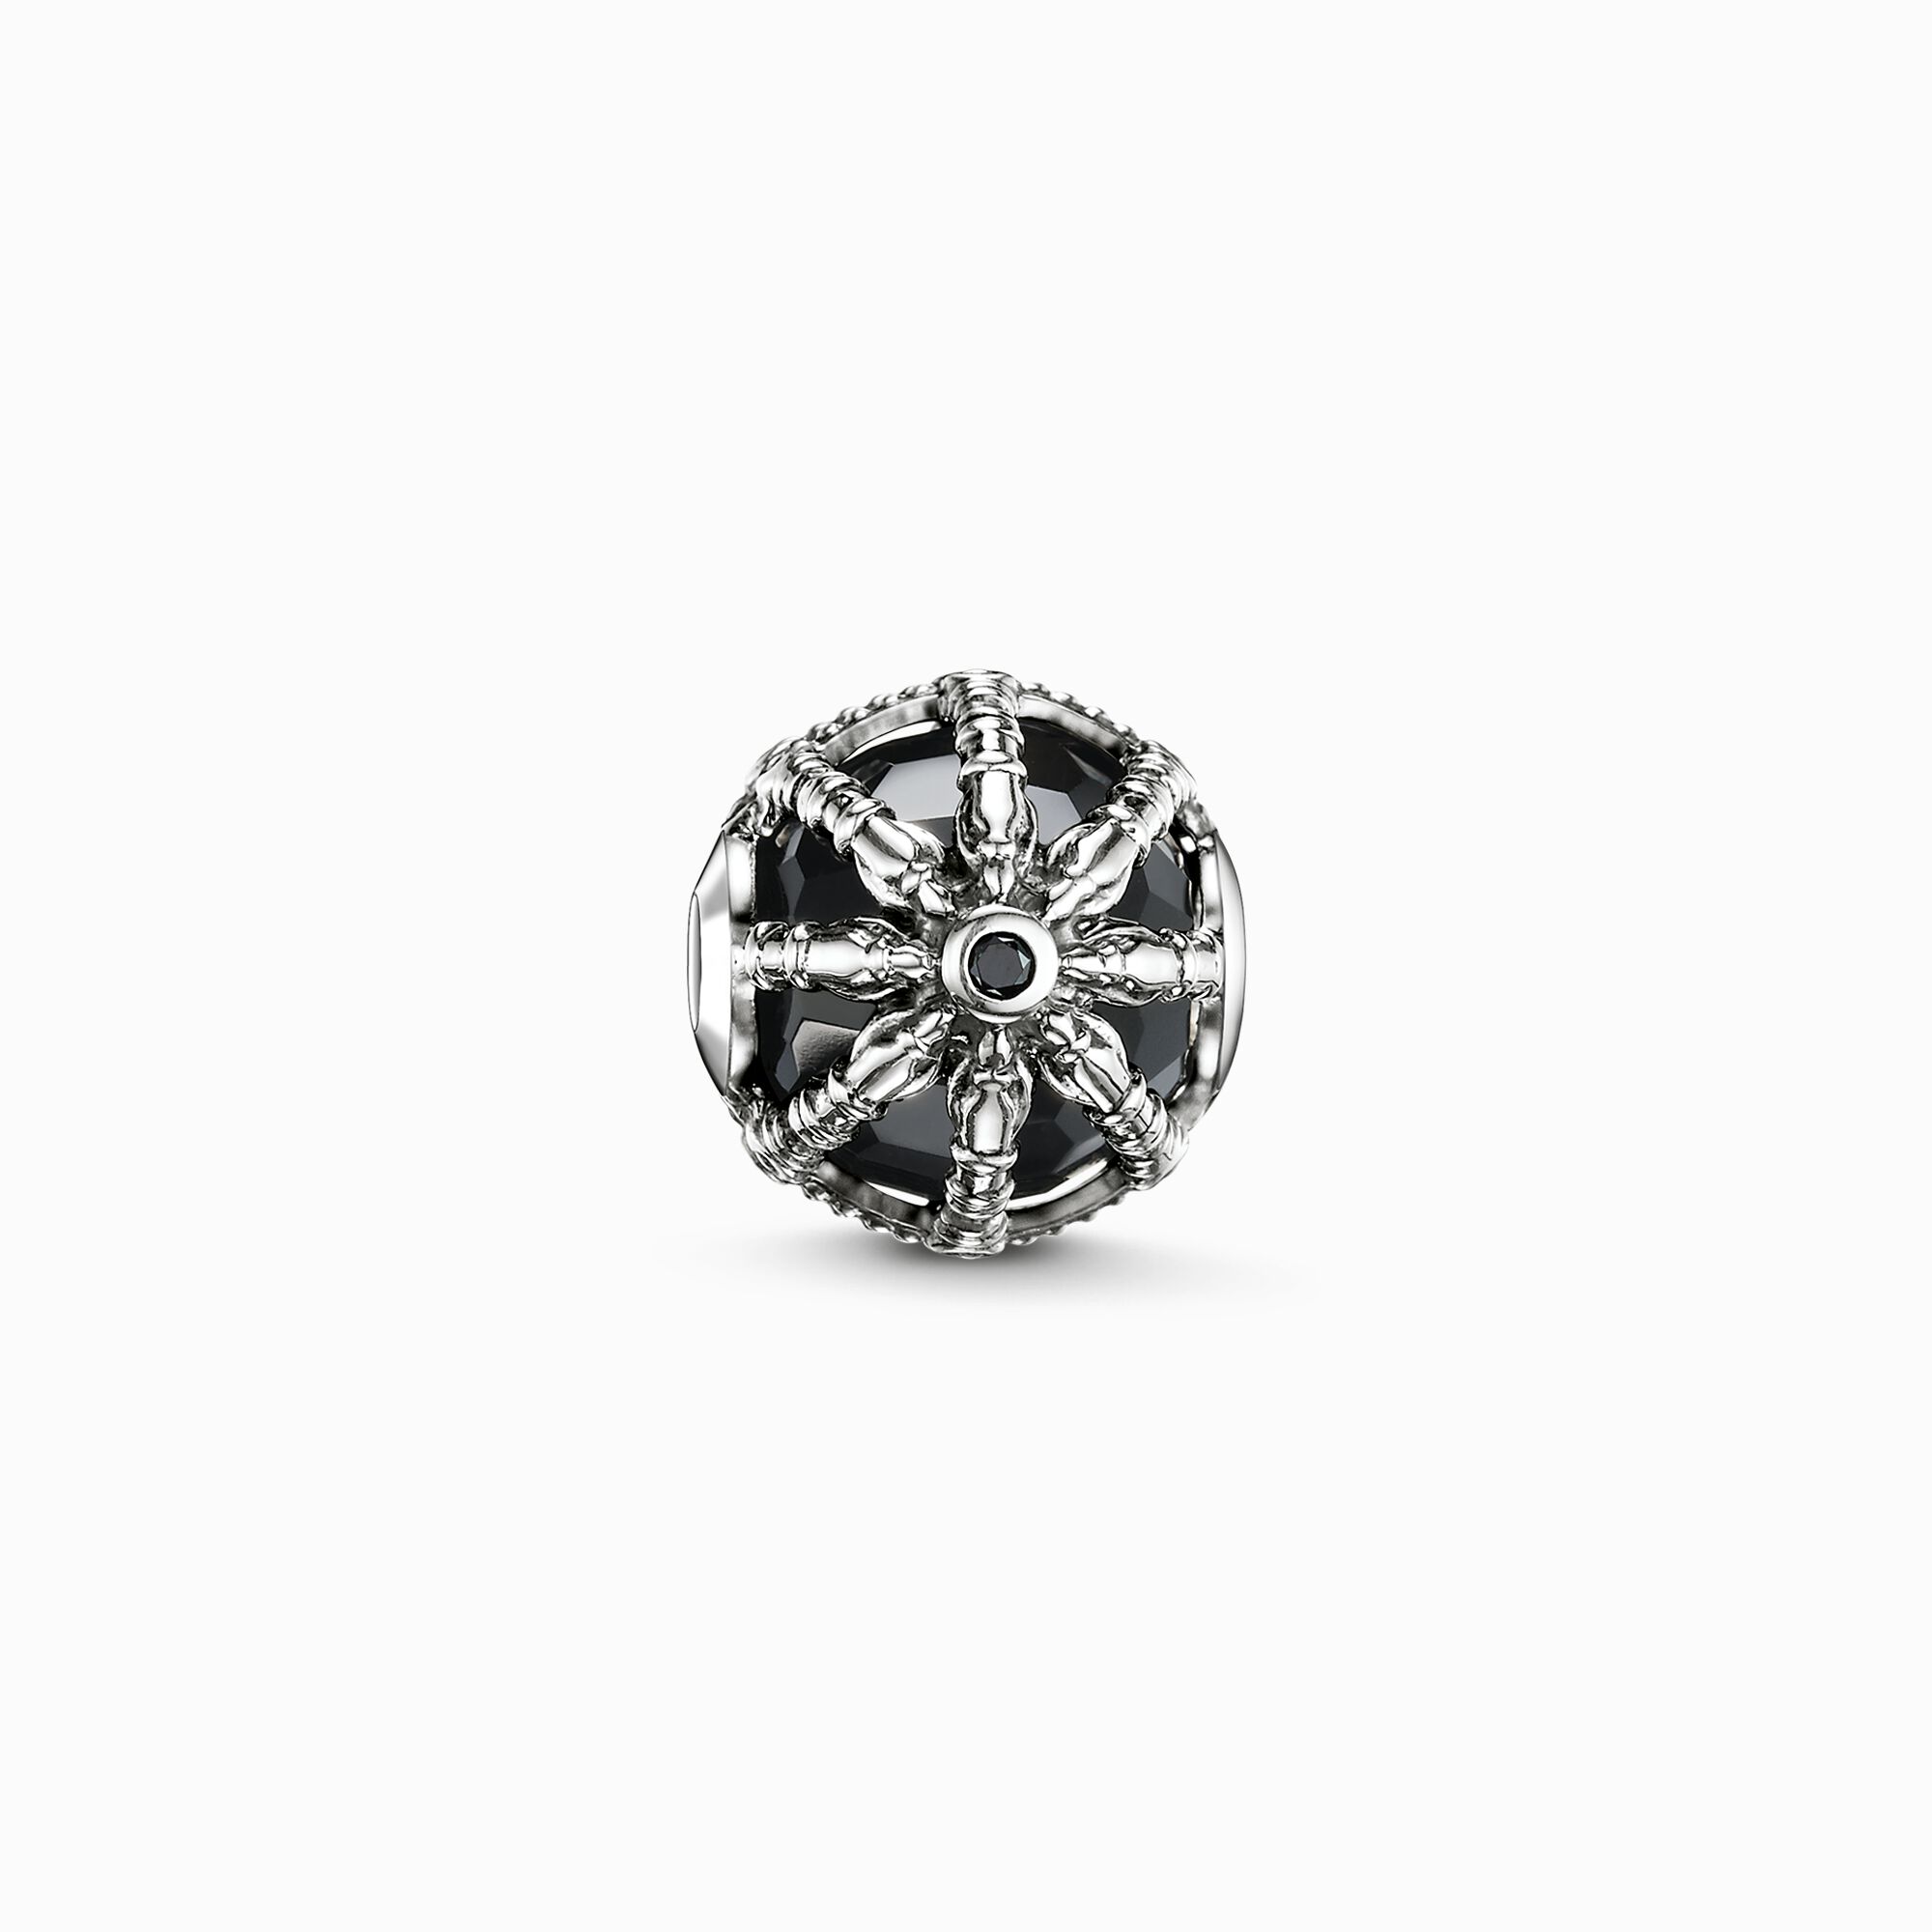 Bead black Karma Wheel from the Karma Beads collection in the THOMAS SABO online store